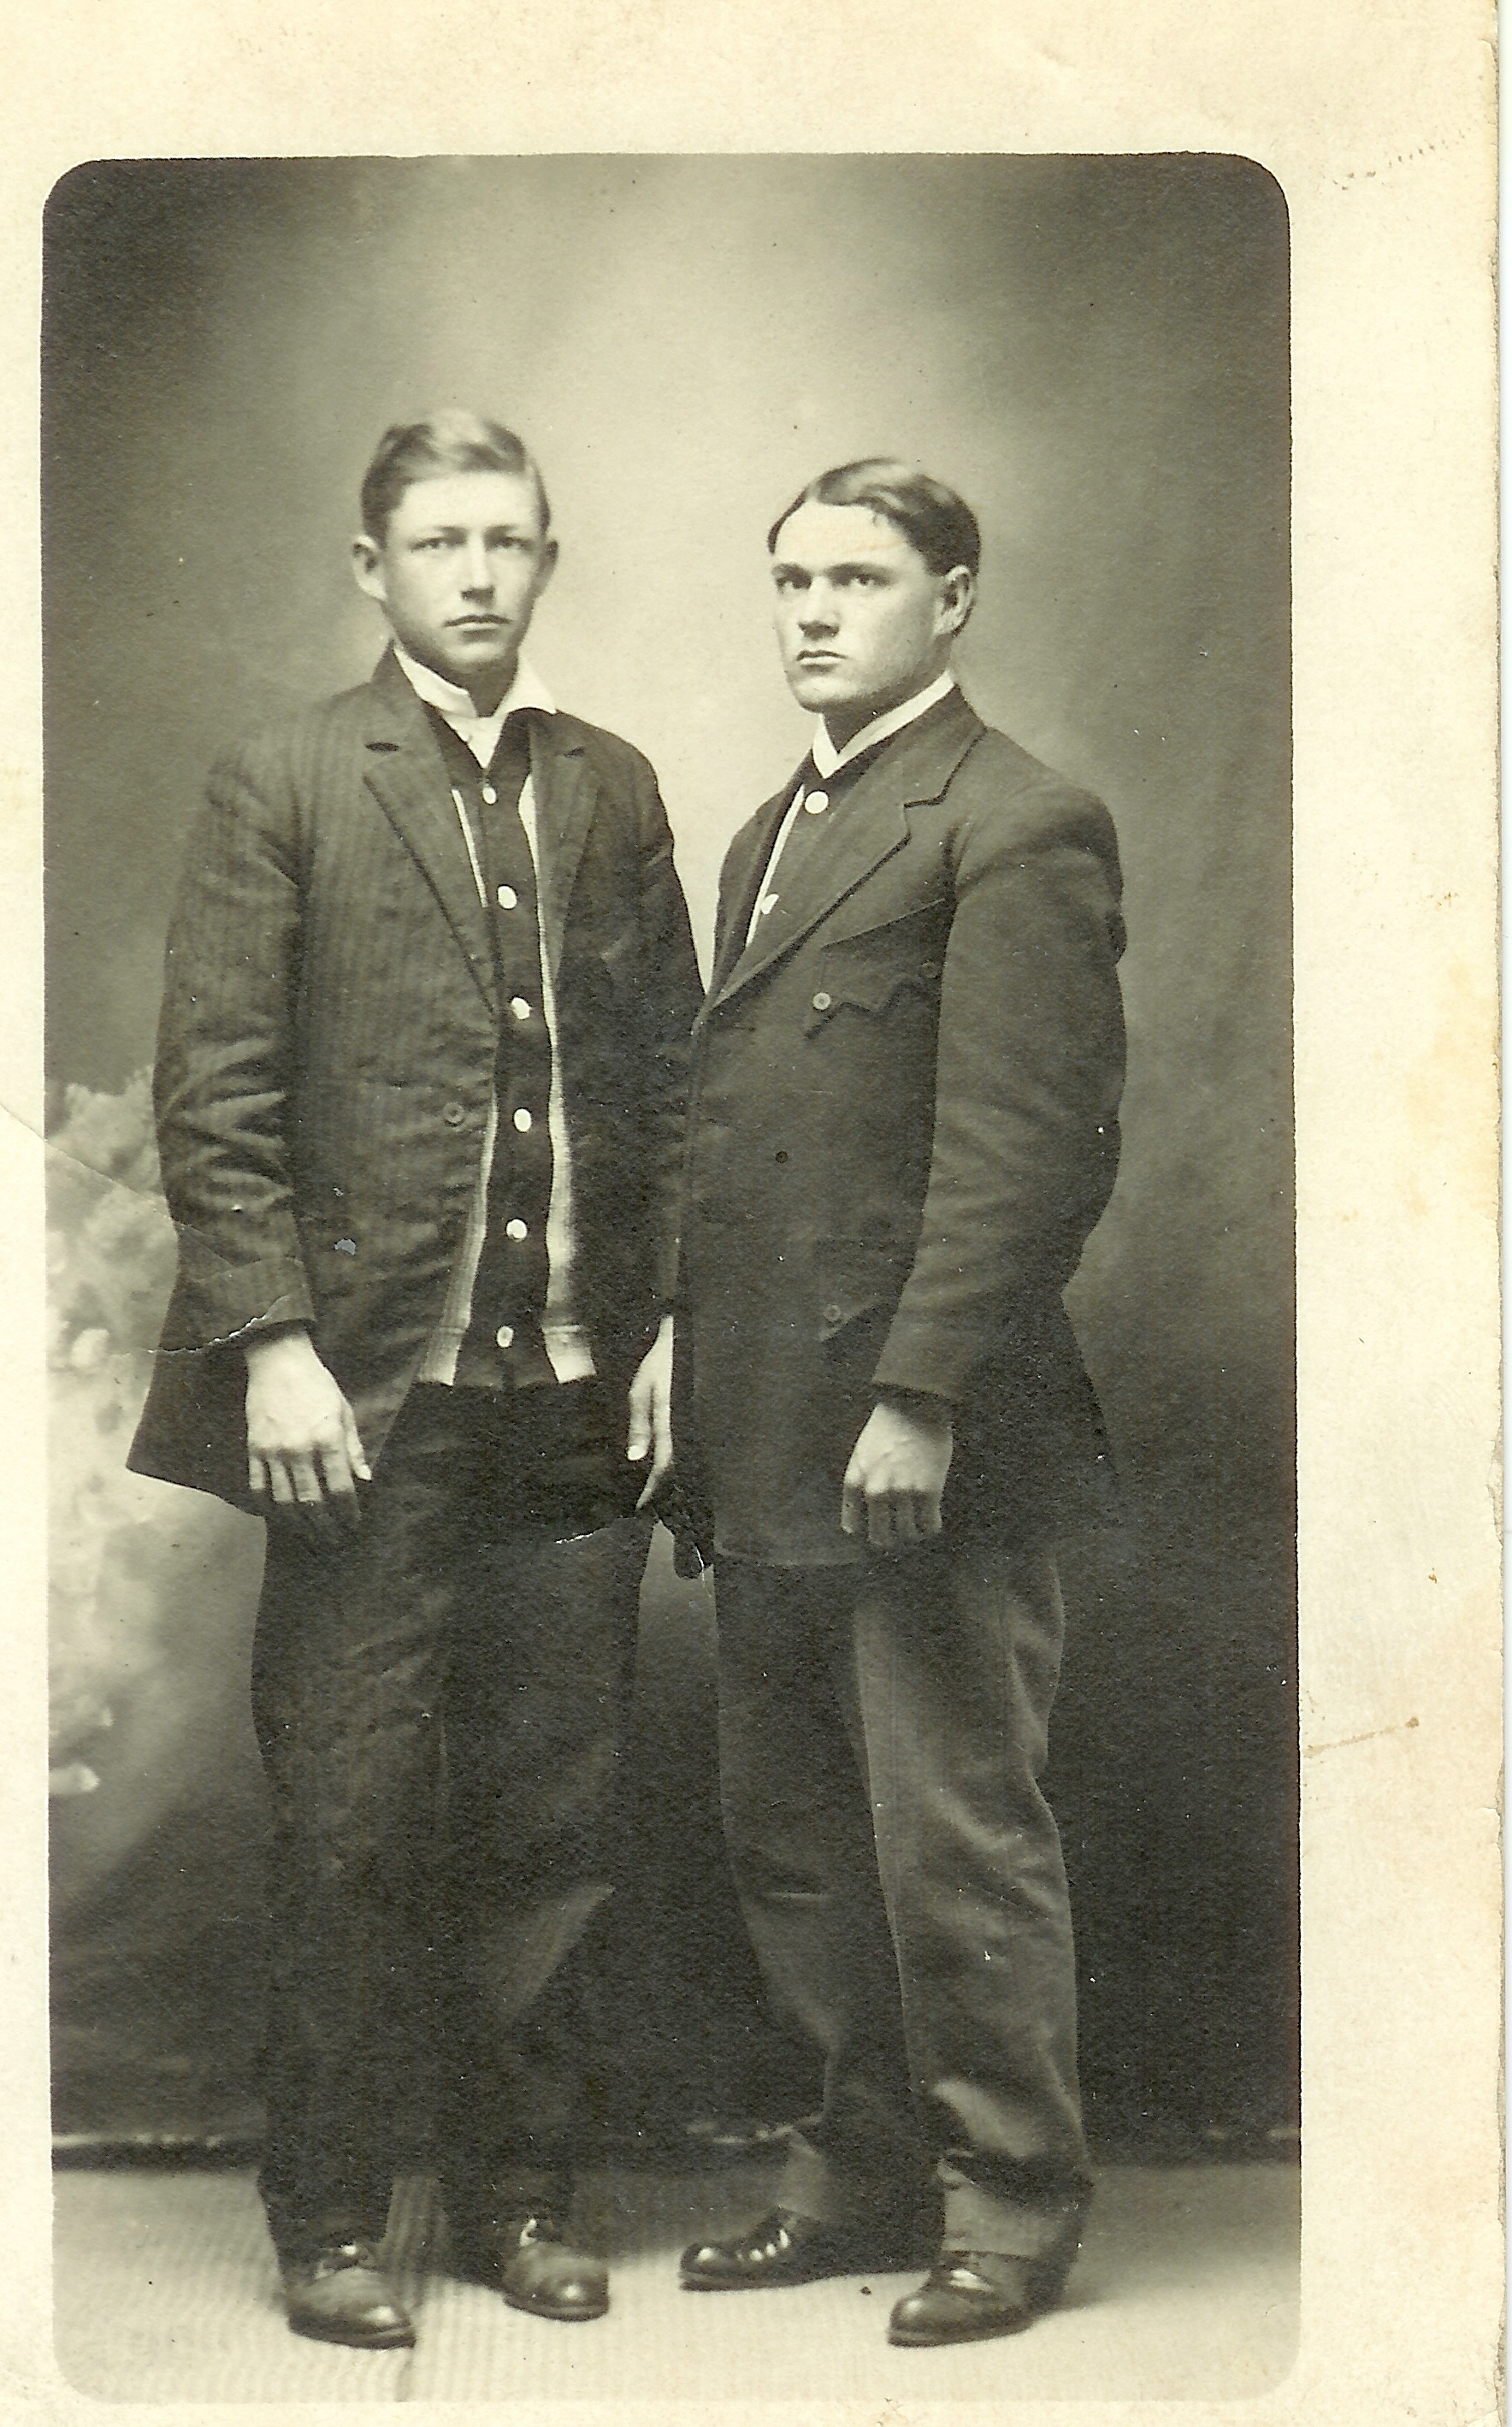 Possibly G.W. (Wash) and Mark Short?